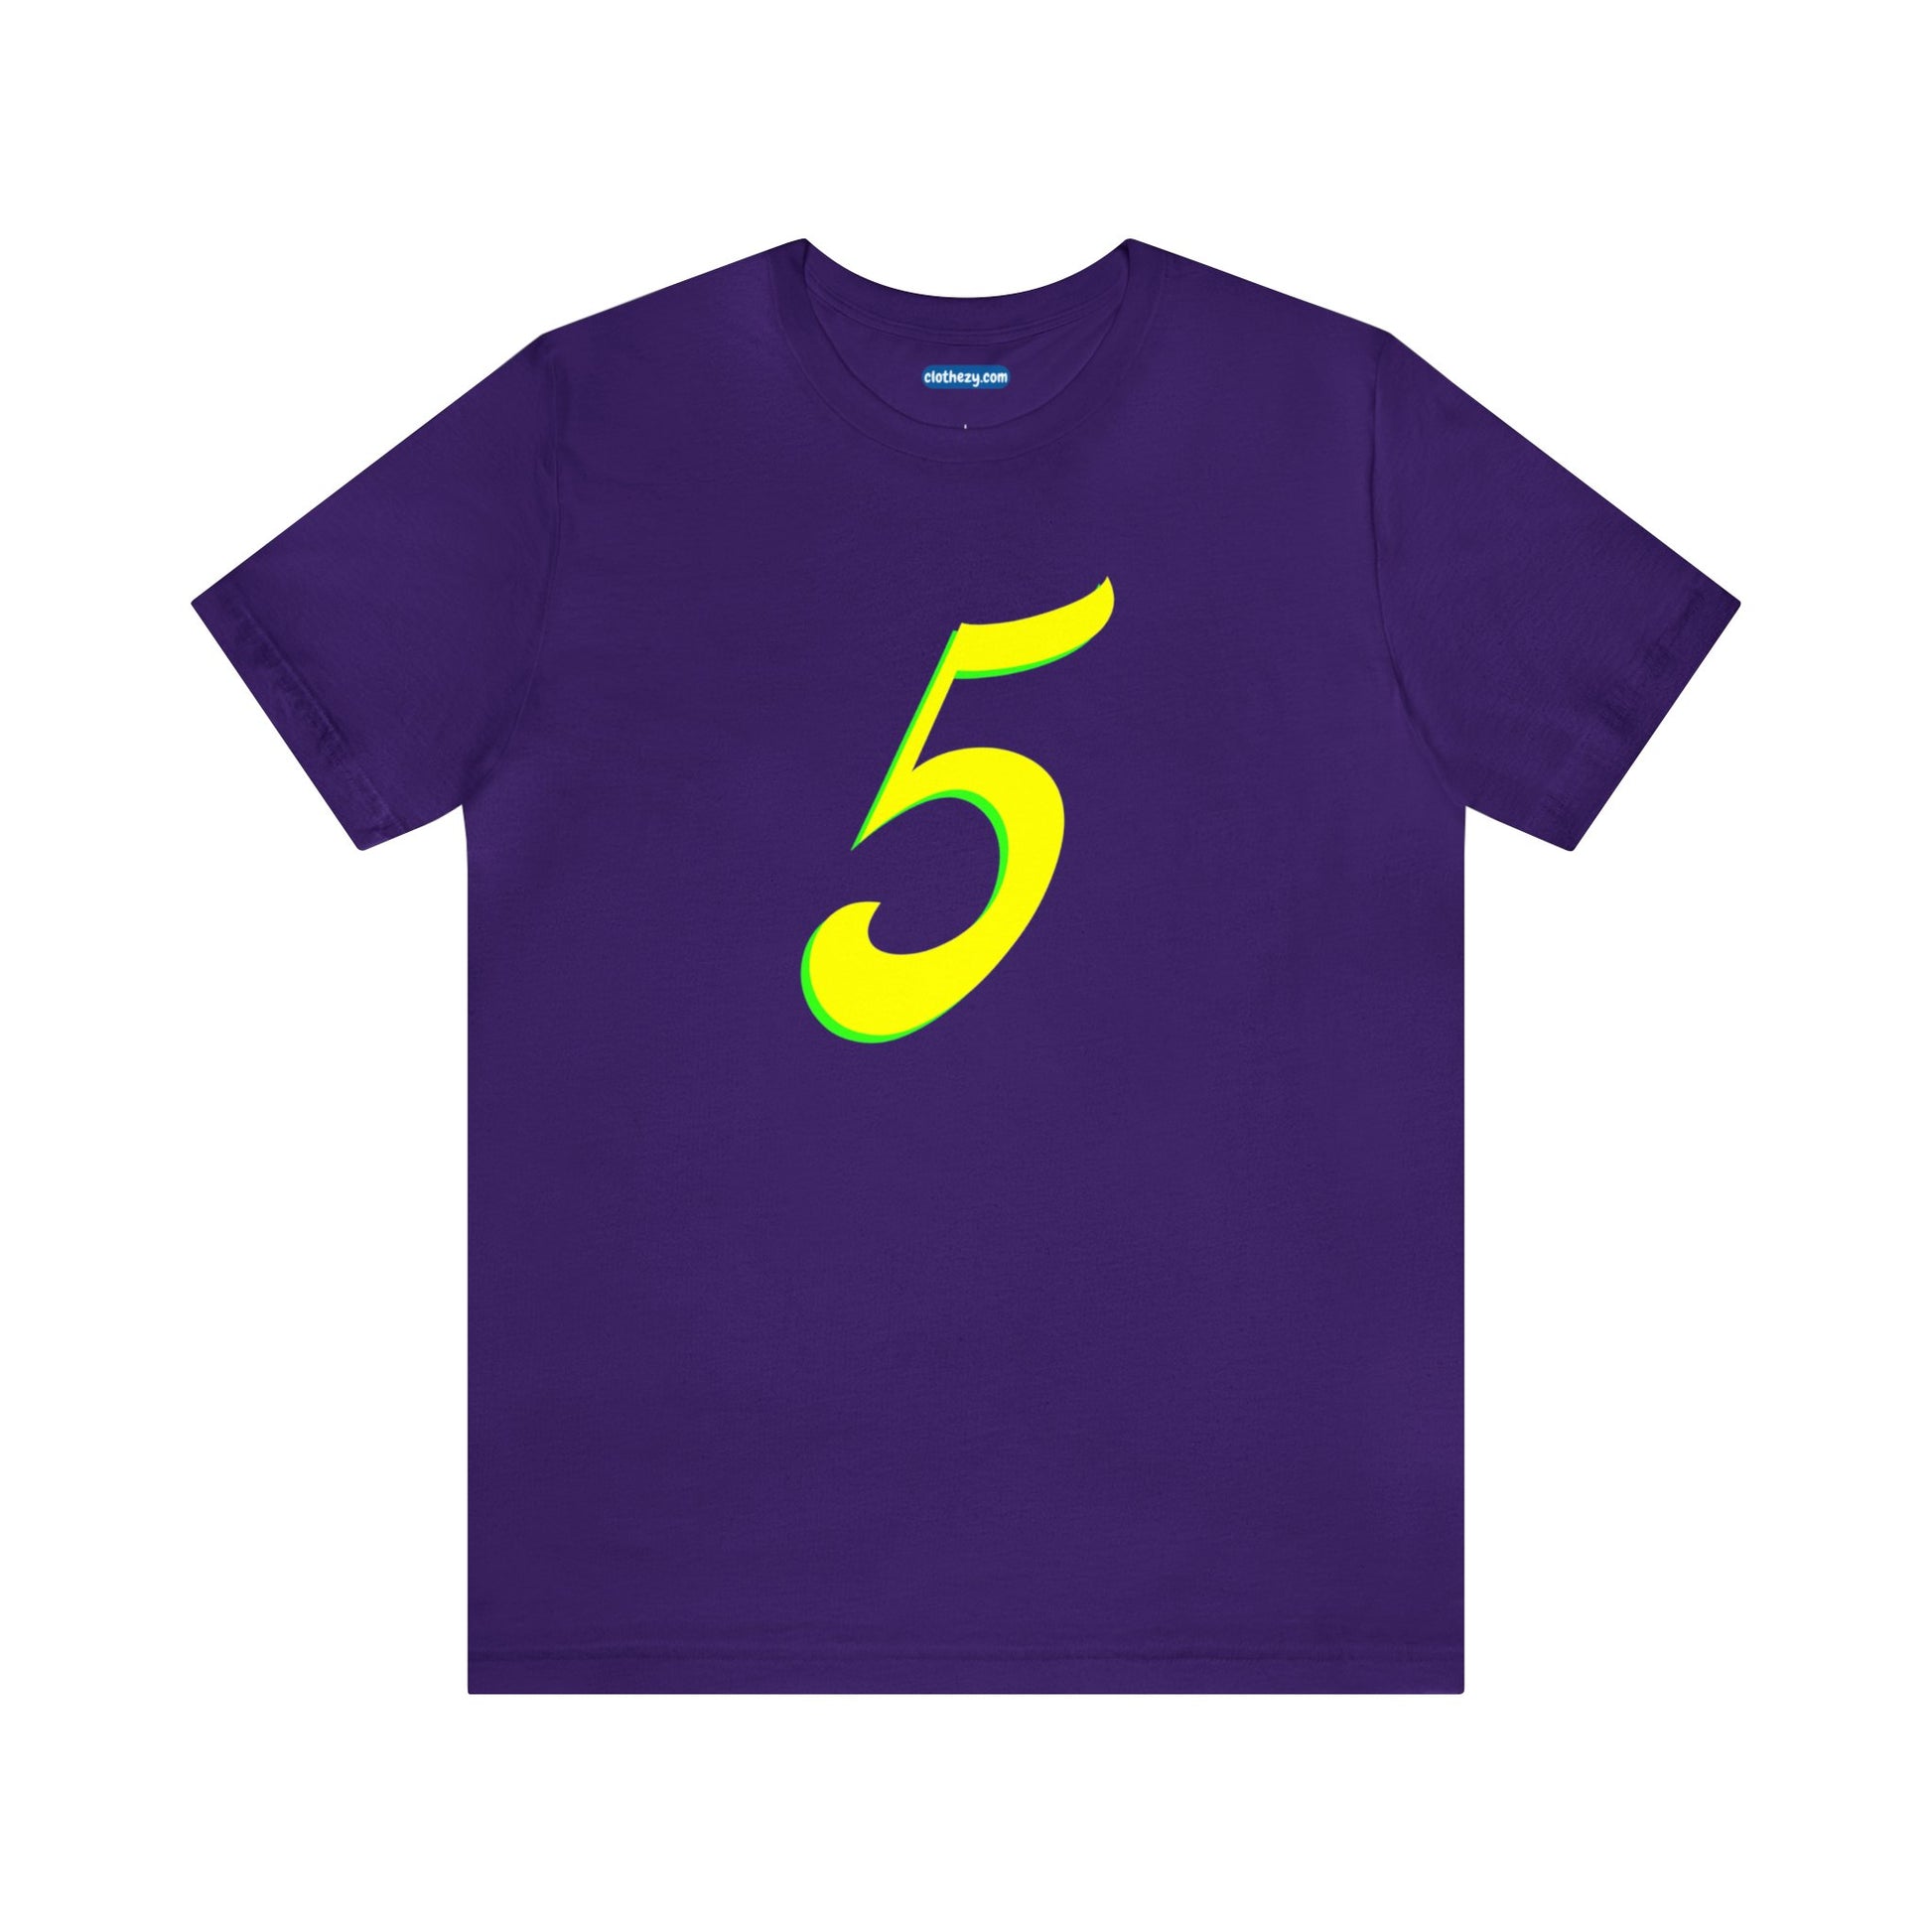 Number 5 Design - Soft Cotton Tee for birthdays and celebrations, Gift for friends and family, Multiple Options by clothezy.com in Purple Size Small - Buy Now